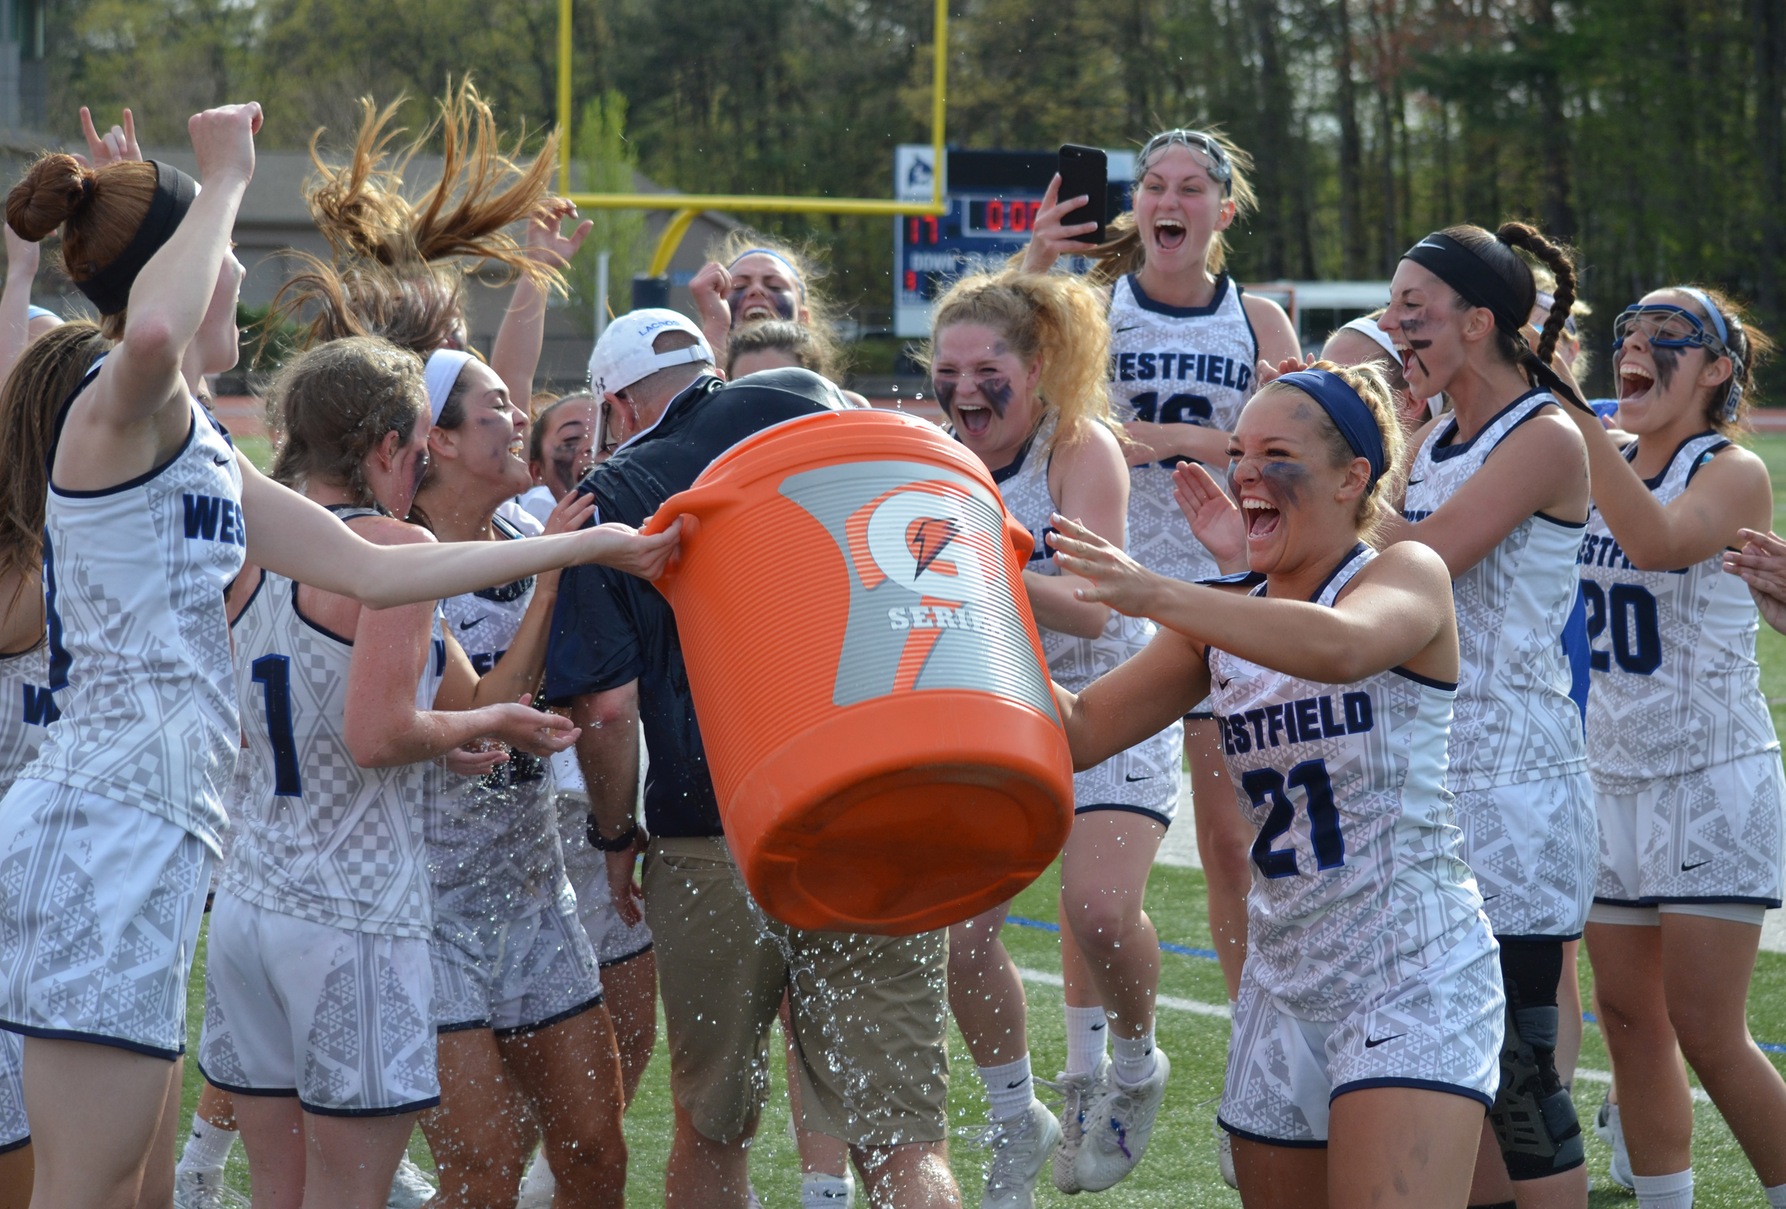 Westfield State coach Jeff Pechulis gets the Gatorade shower from his team after the 2018 MASCAC Championship game.